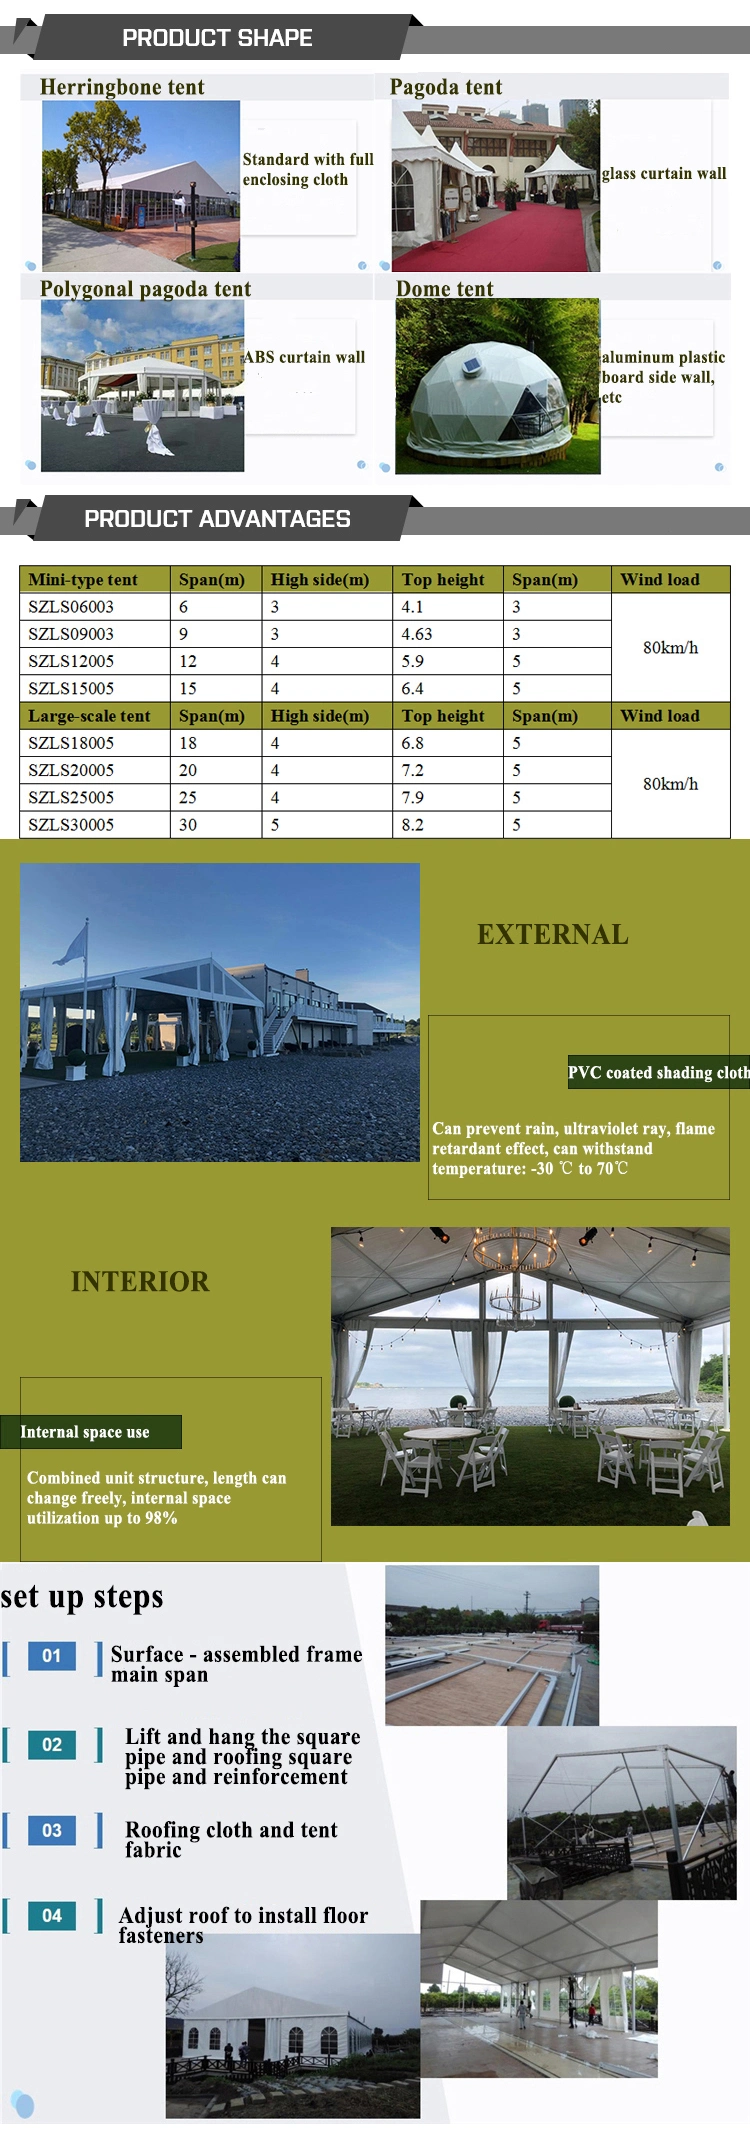 Outdoor Aluminum Structure Giant Wedding Party Marquees Tents Clear Roof Top Wedding Tents